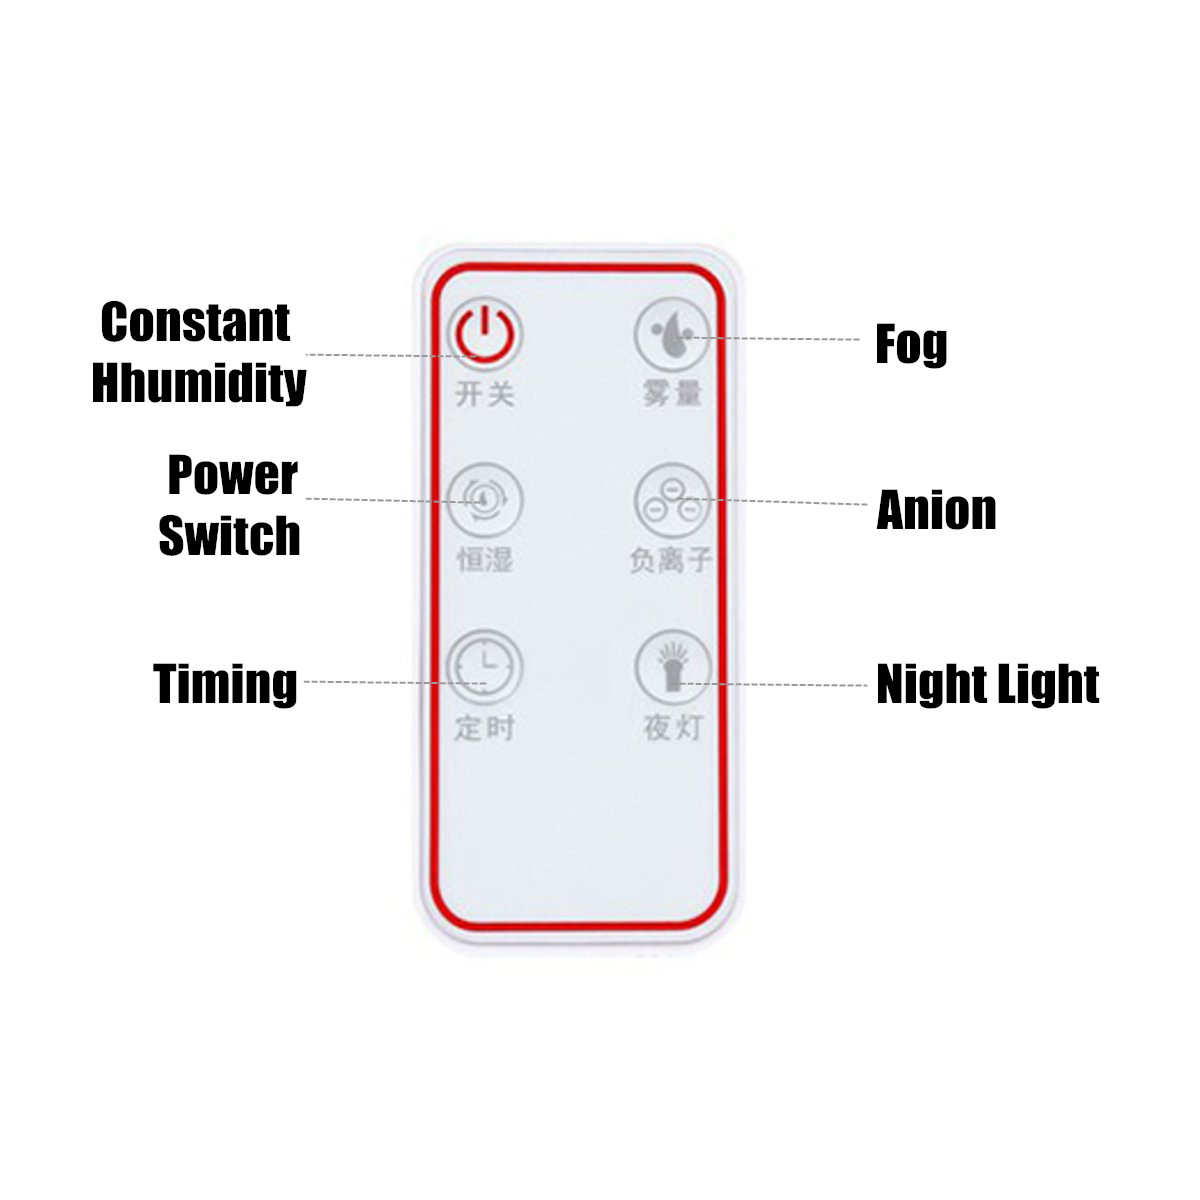 LED-Display-Remote-Control-5L-Cool-Mist-Humidifier-Air-Diffuser-Home-Office-Room-1328719